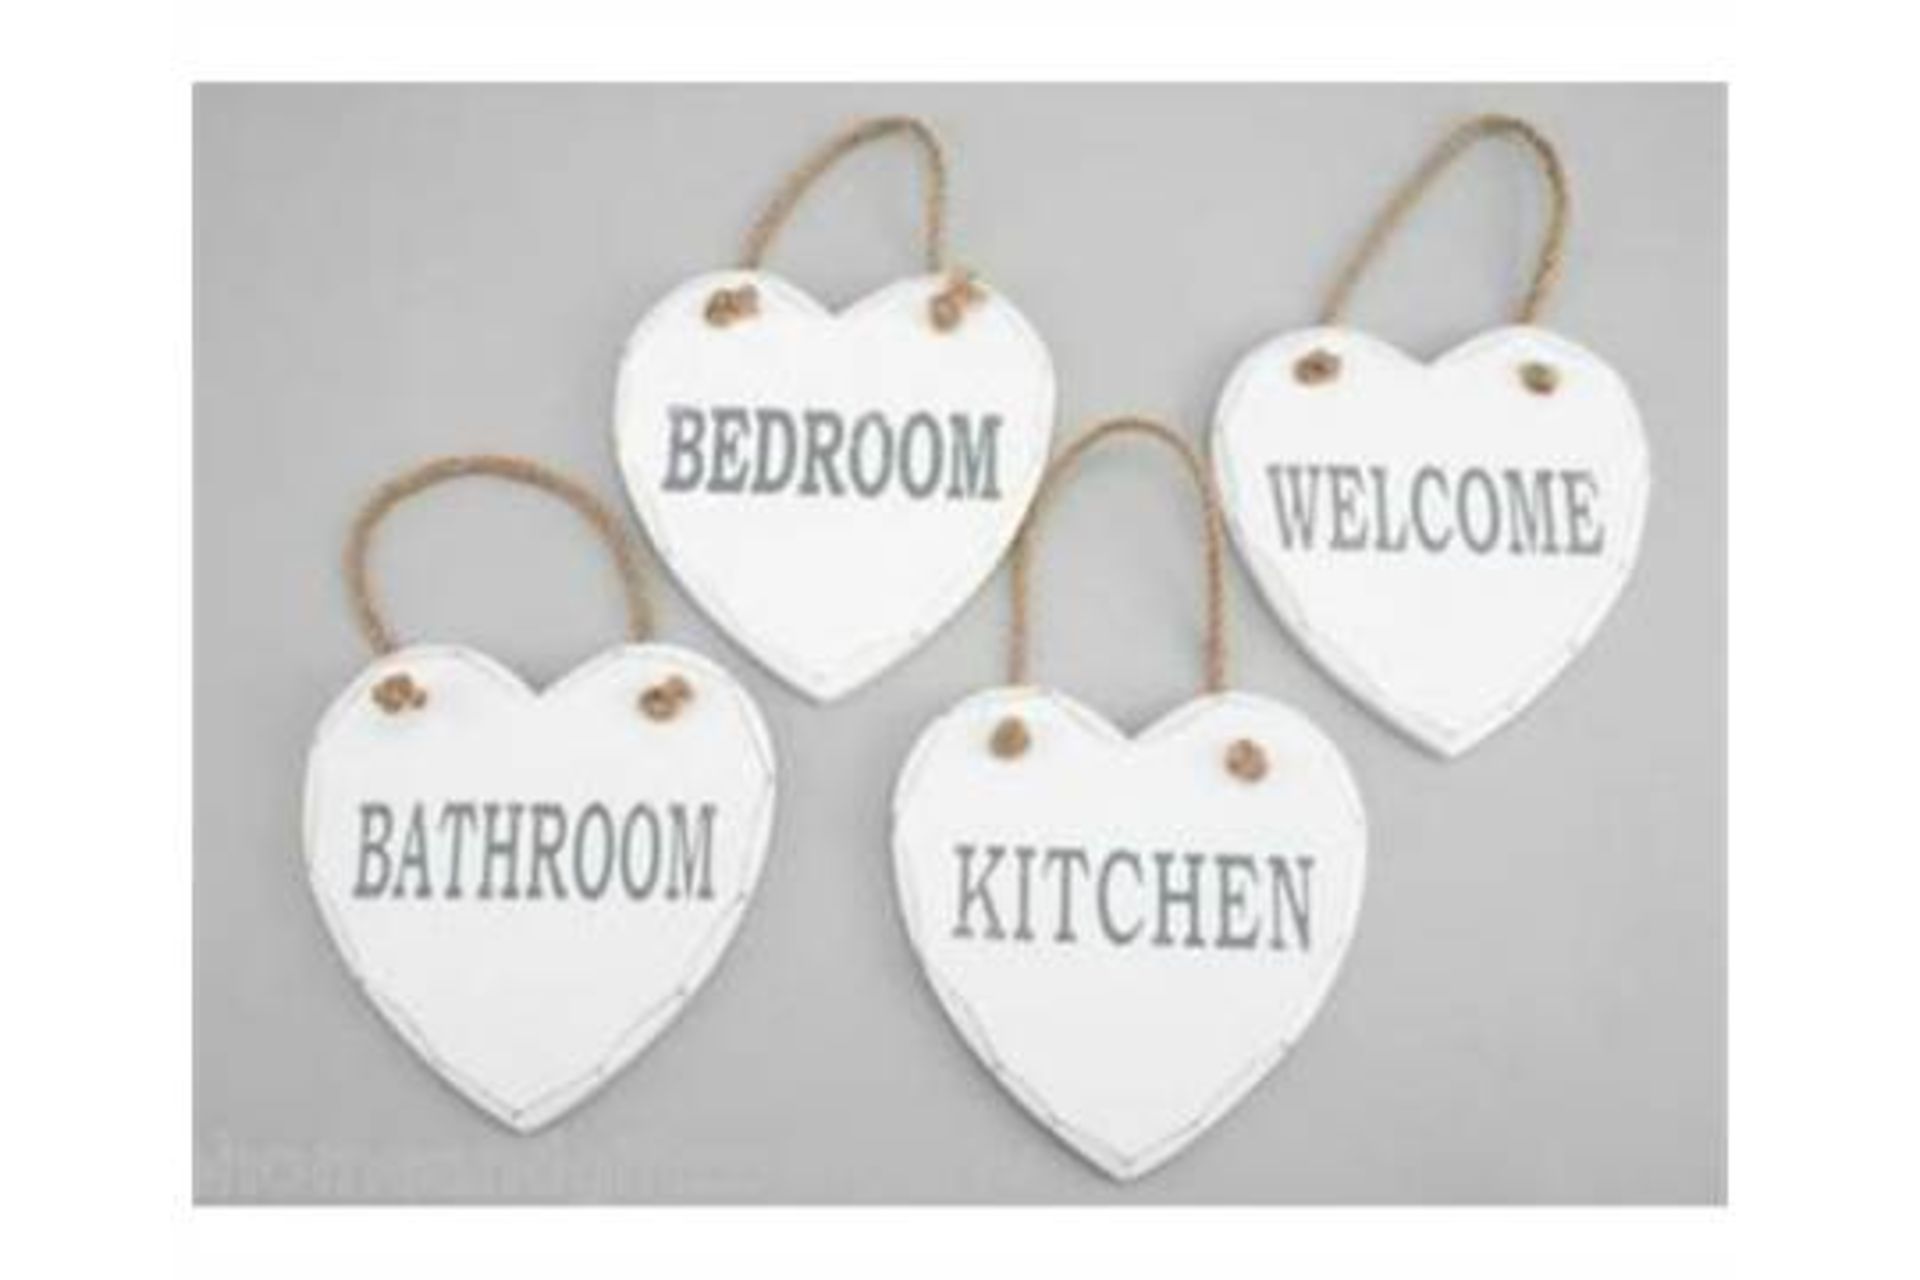 488 X HANGING DECORATIONS, SIGNS, PLAQUES, ETC. RRP £ 2,022.00 - Image 5 of 6